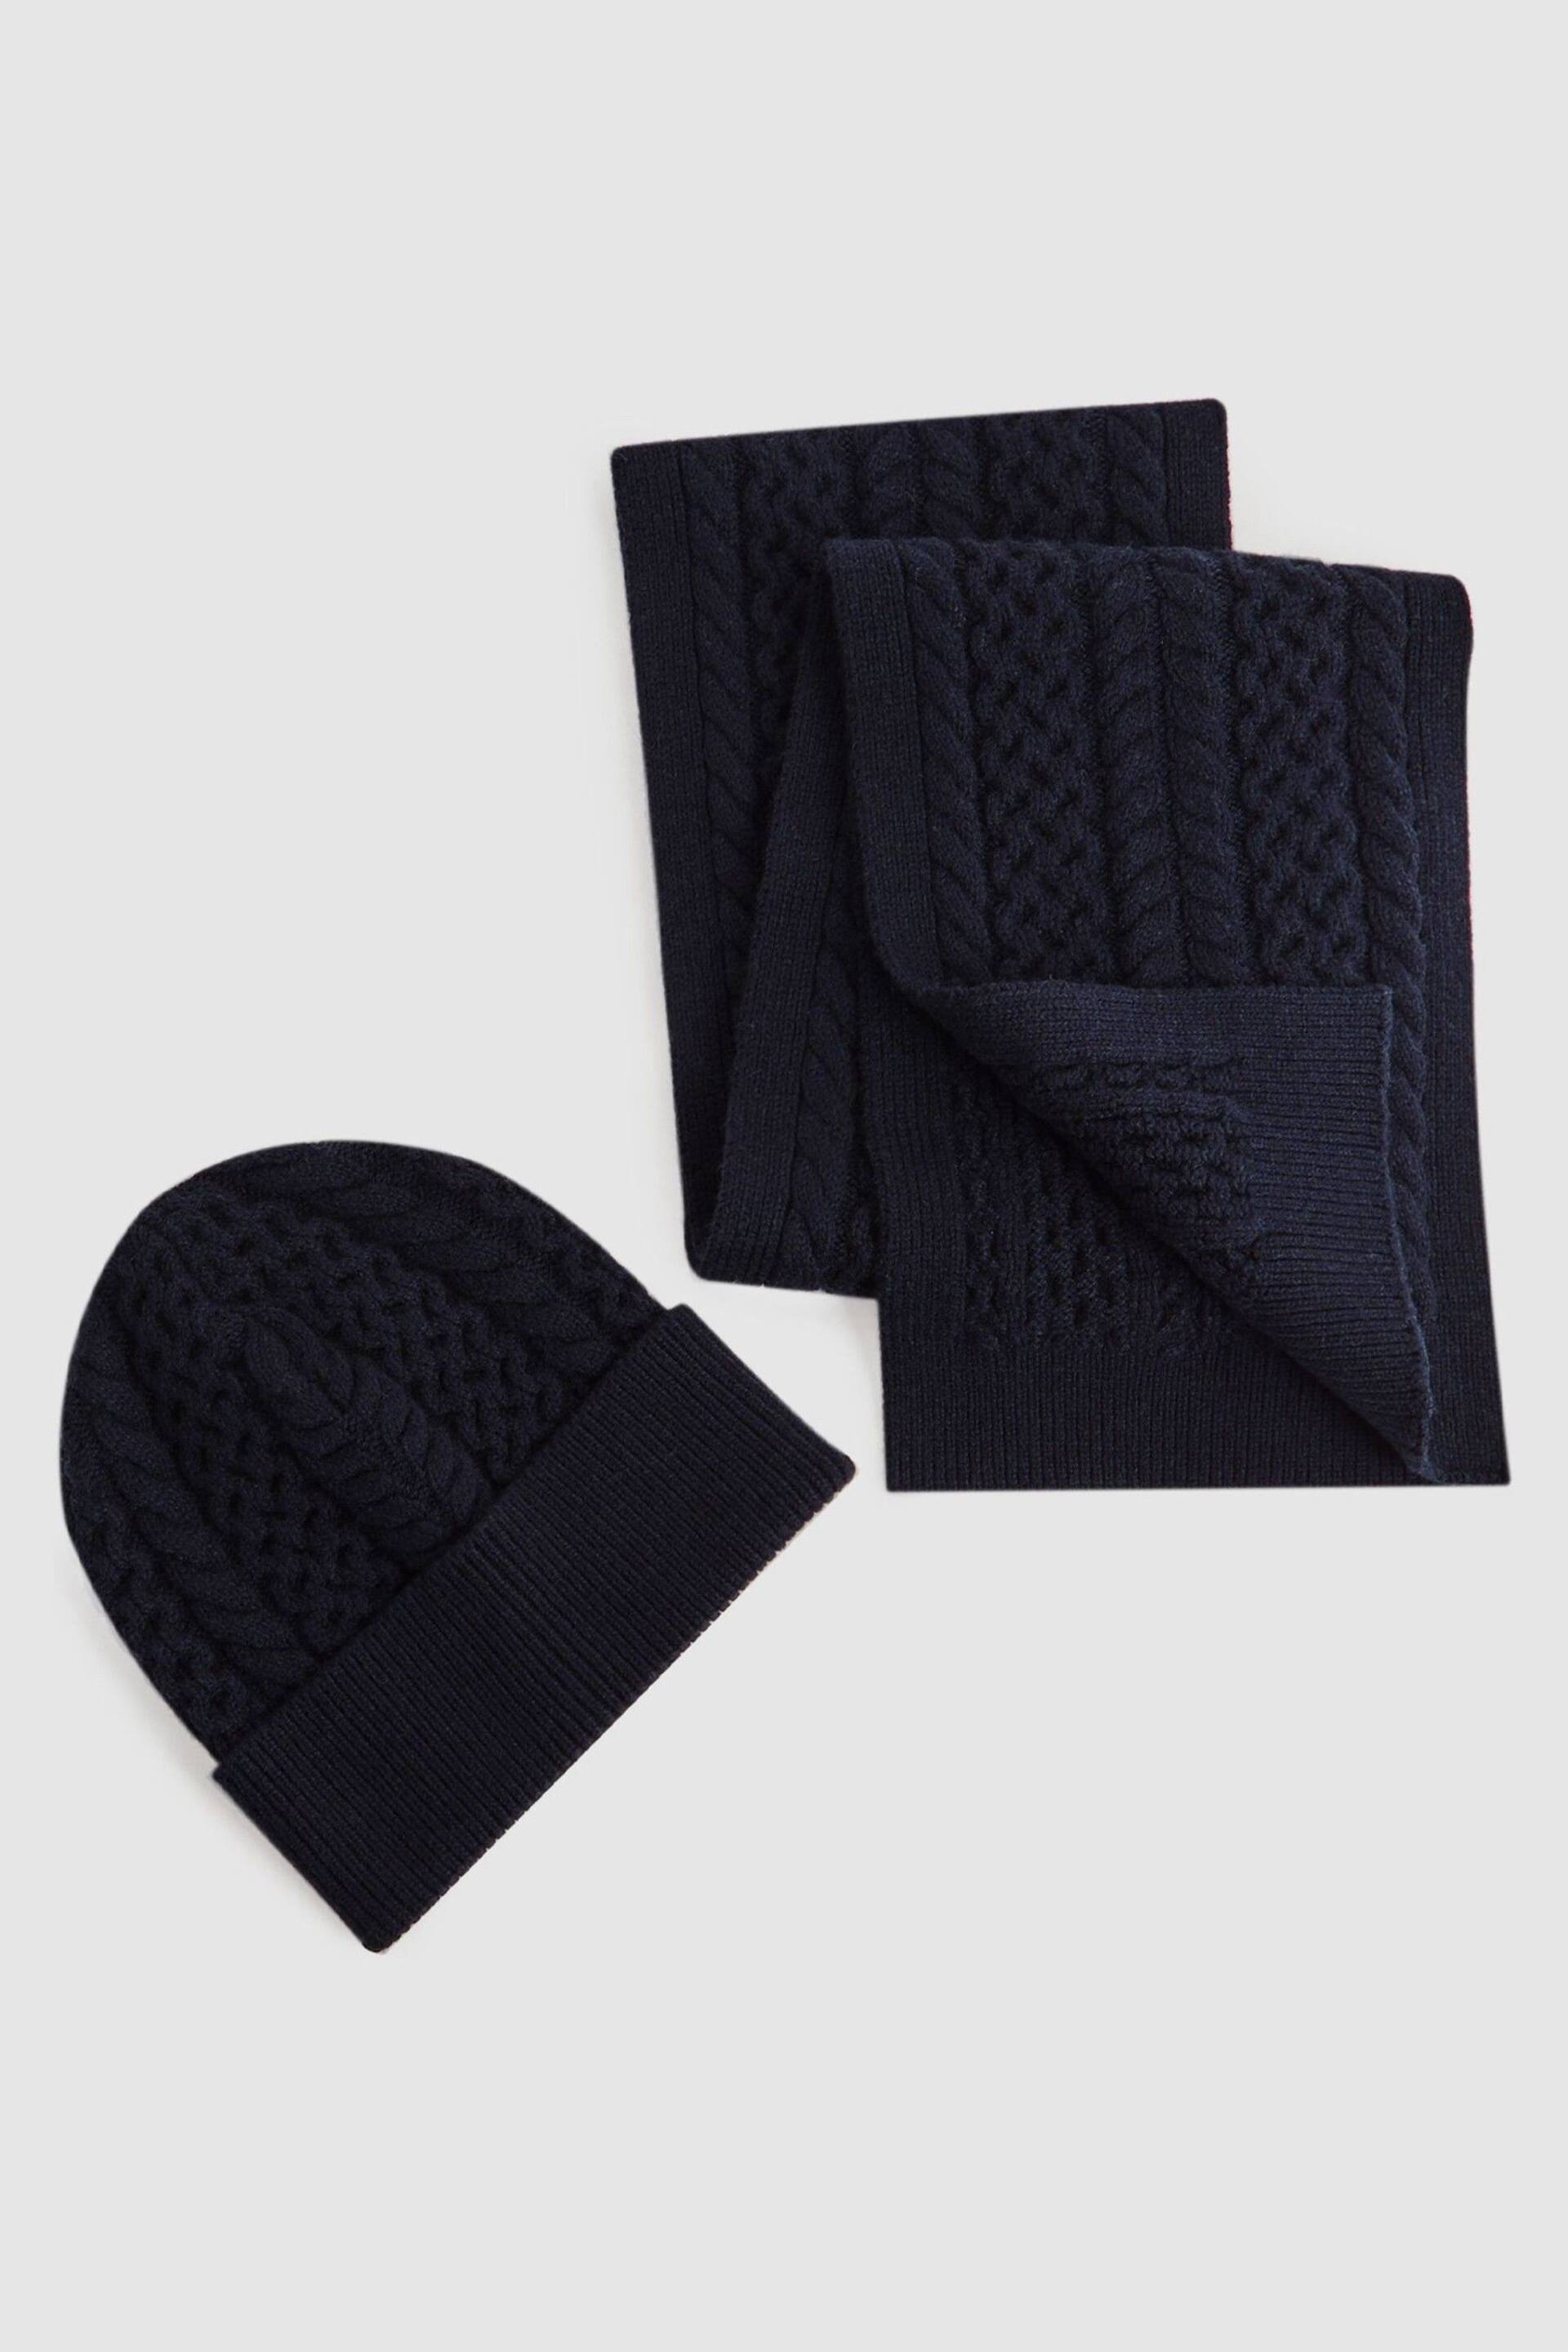 Reiss Navy Heath Senior Knitted Scarf and Beanie Hat Set - Image 1 of 5